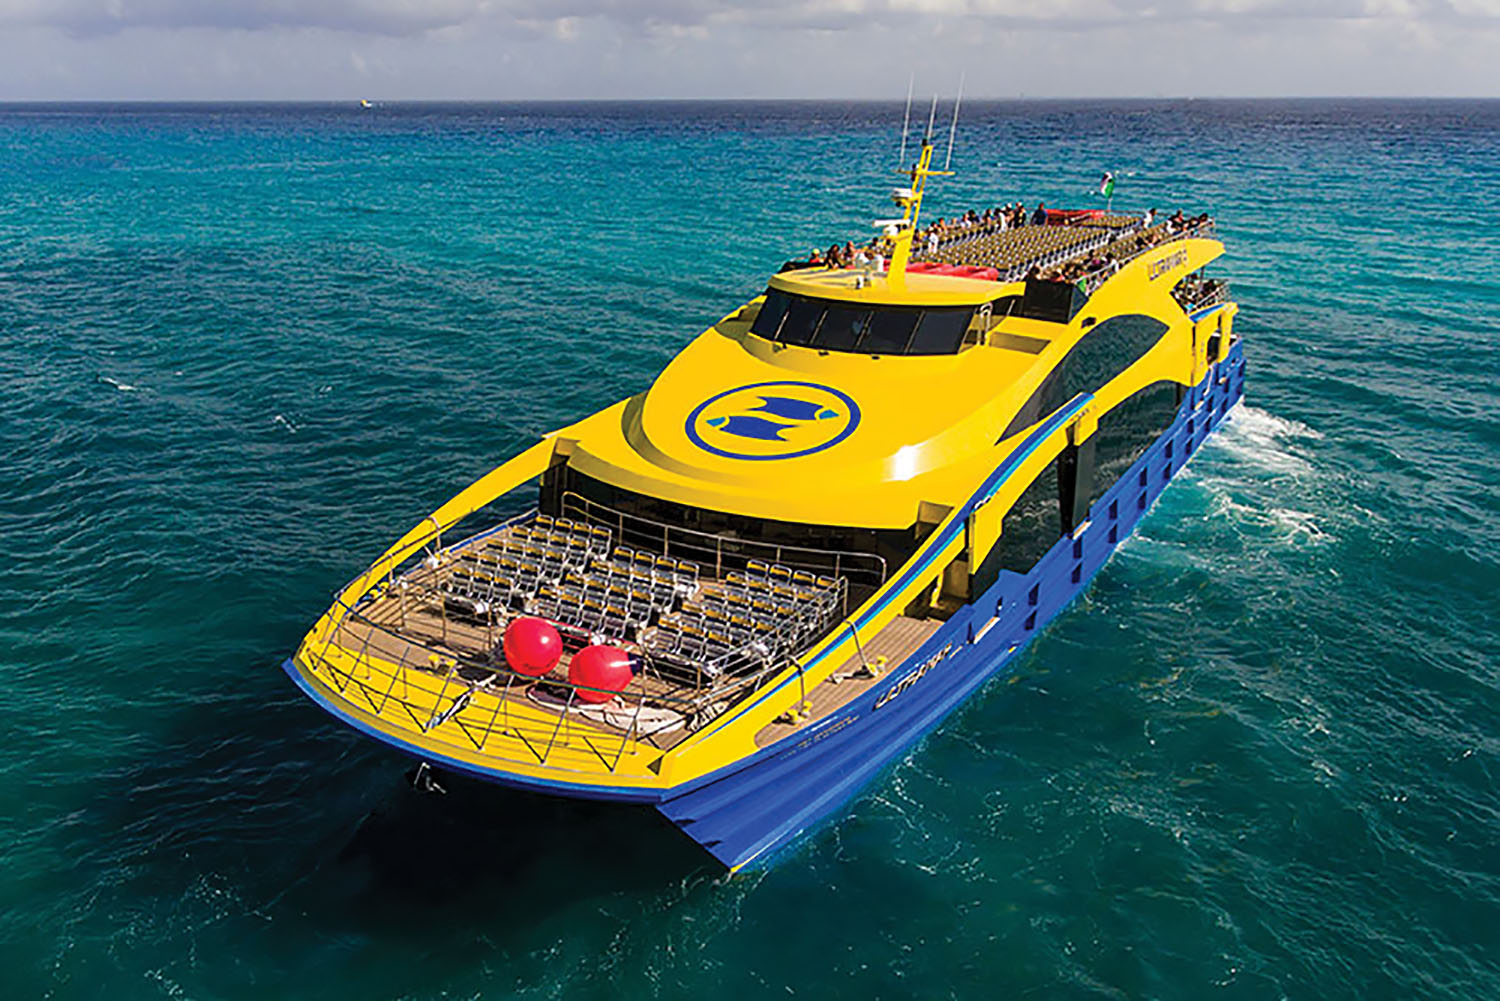 The new passenger vessel is fitted with a pair of MTU main engines, a power-package upgrade over its sister ship.